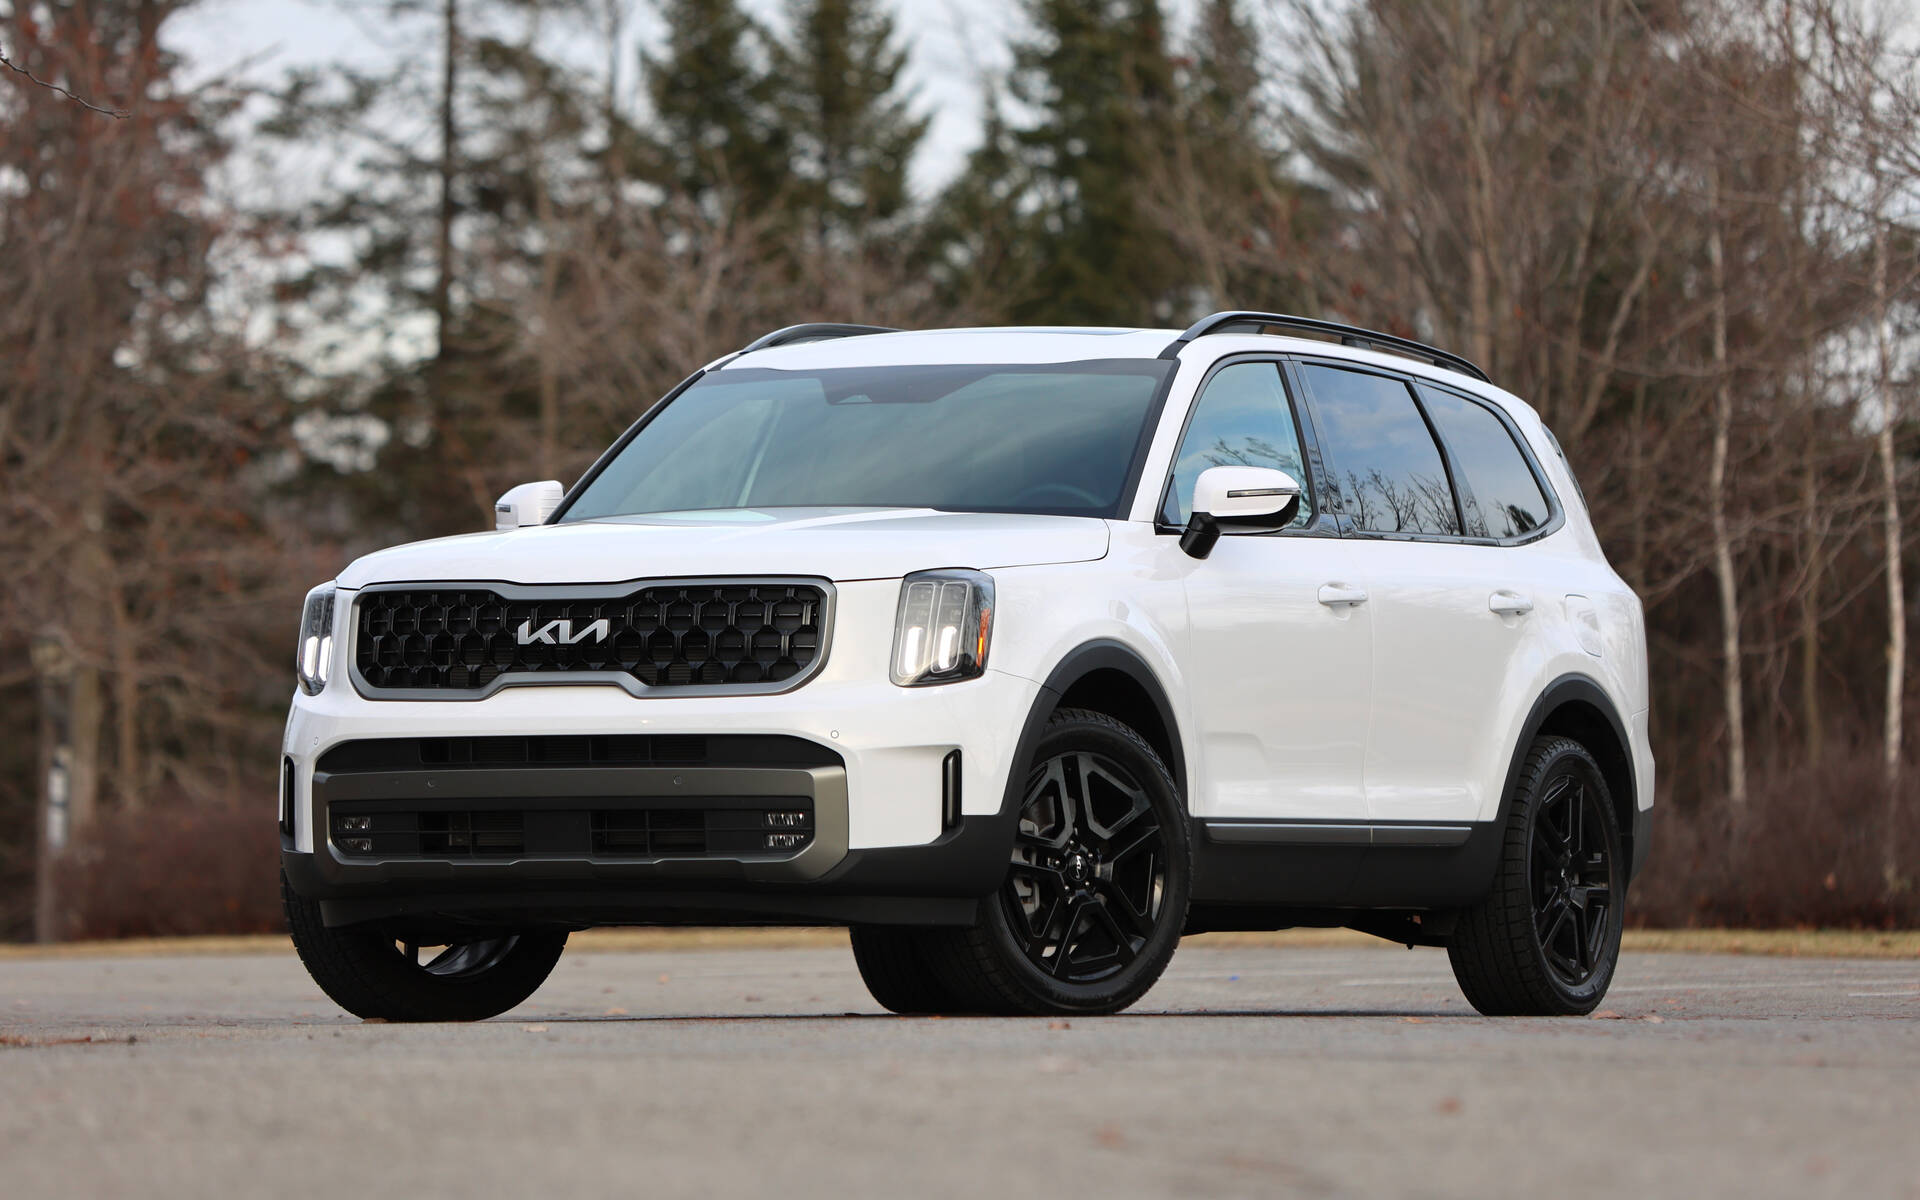 WHAT MAKES THE 2023 KIA TELLURIDE A BETTER BUY OVER THE 2023